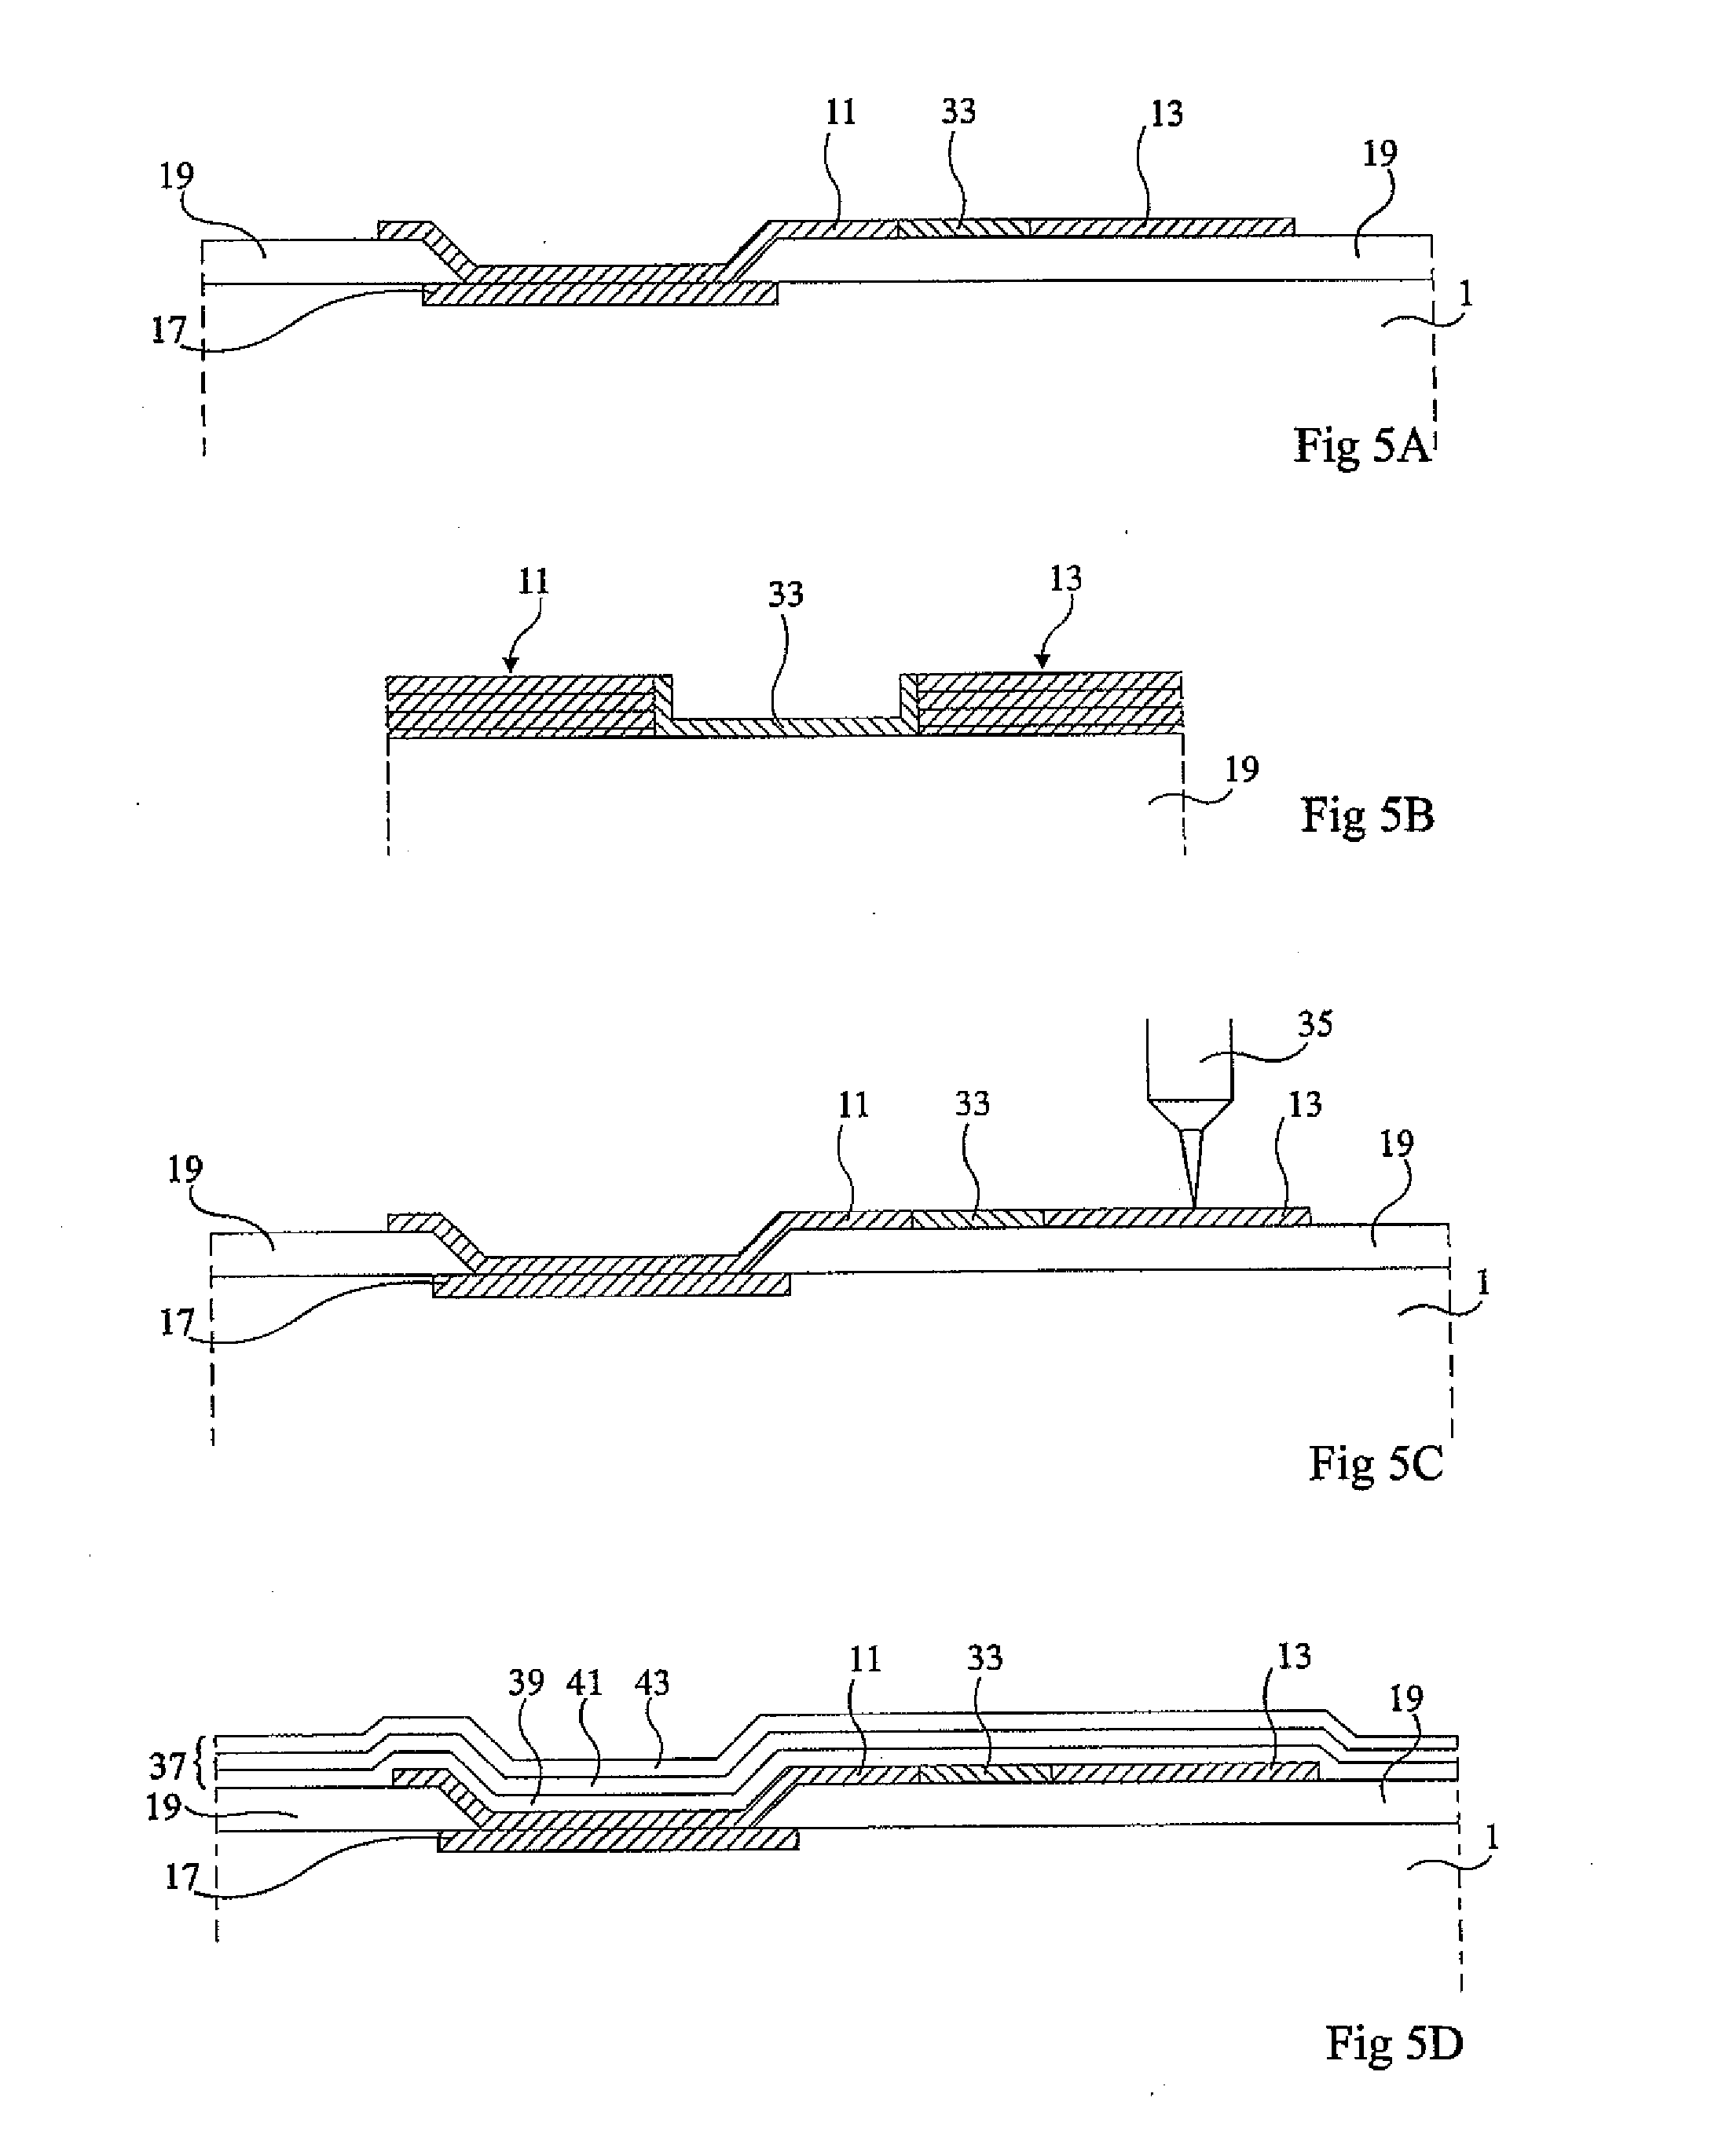 Method for manufacturing and testing an integrated electronic circuit